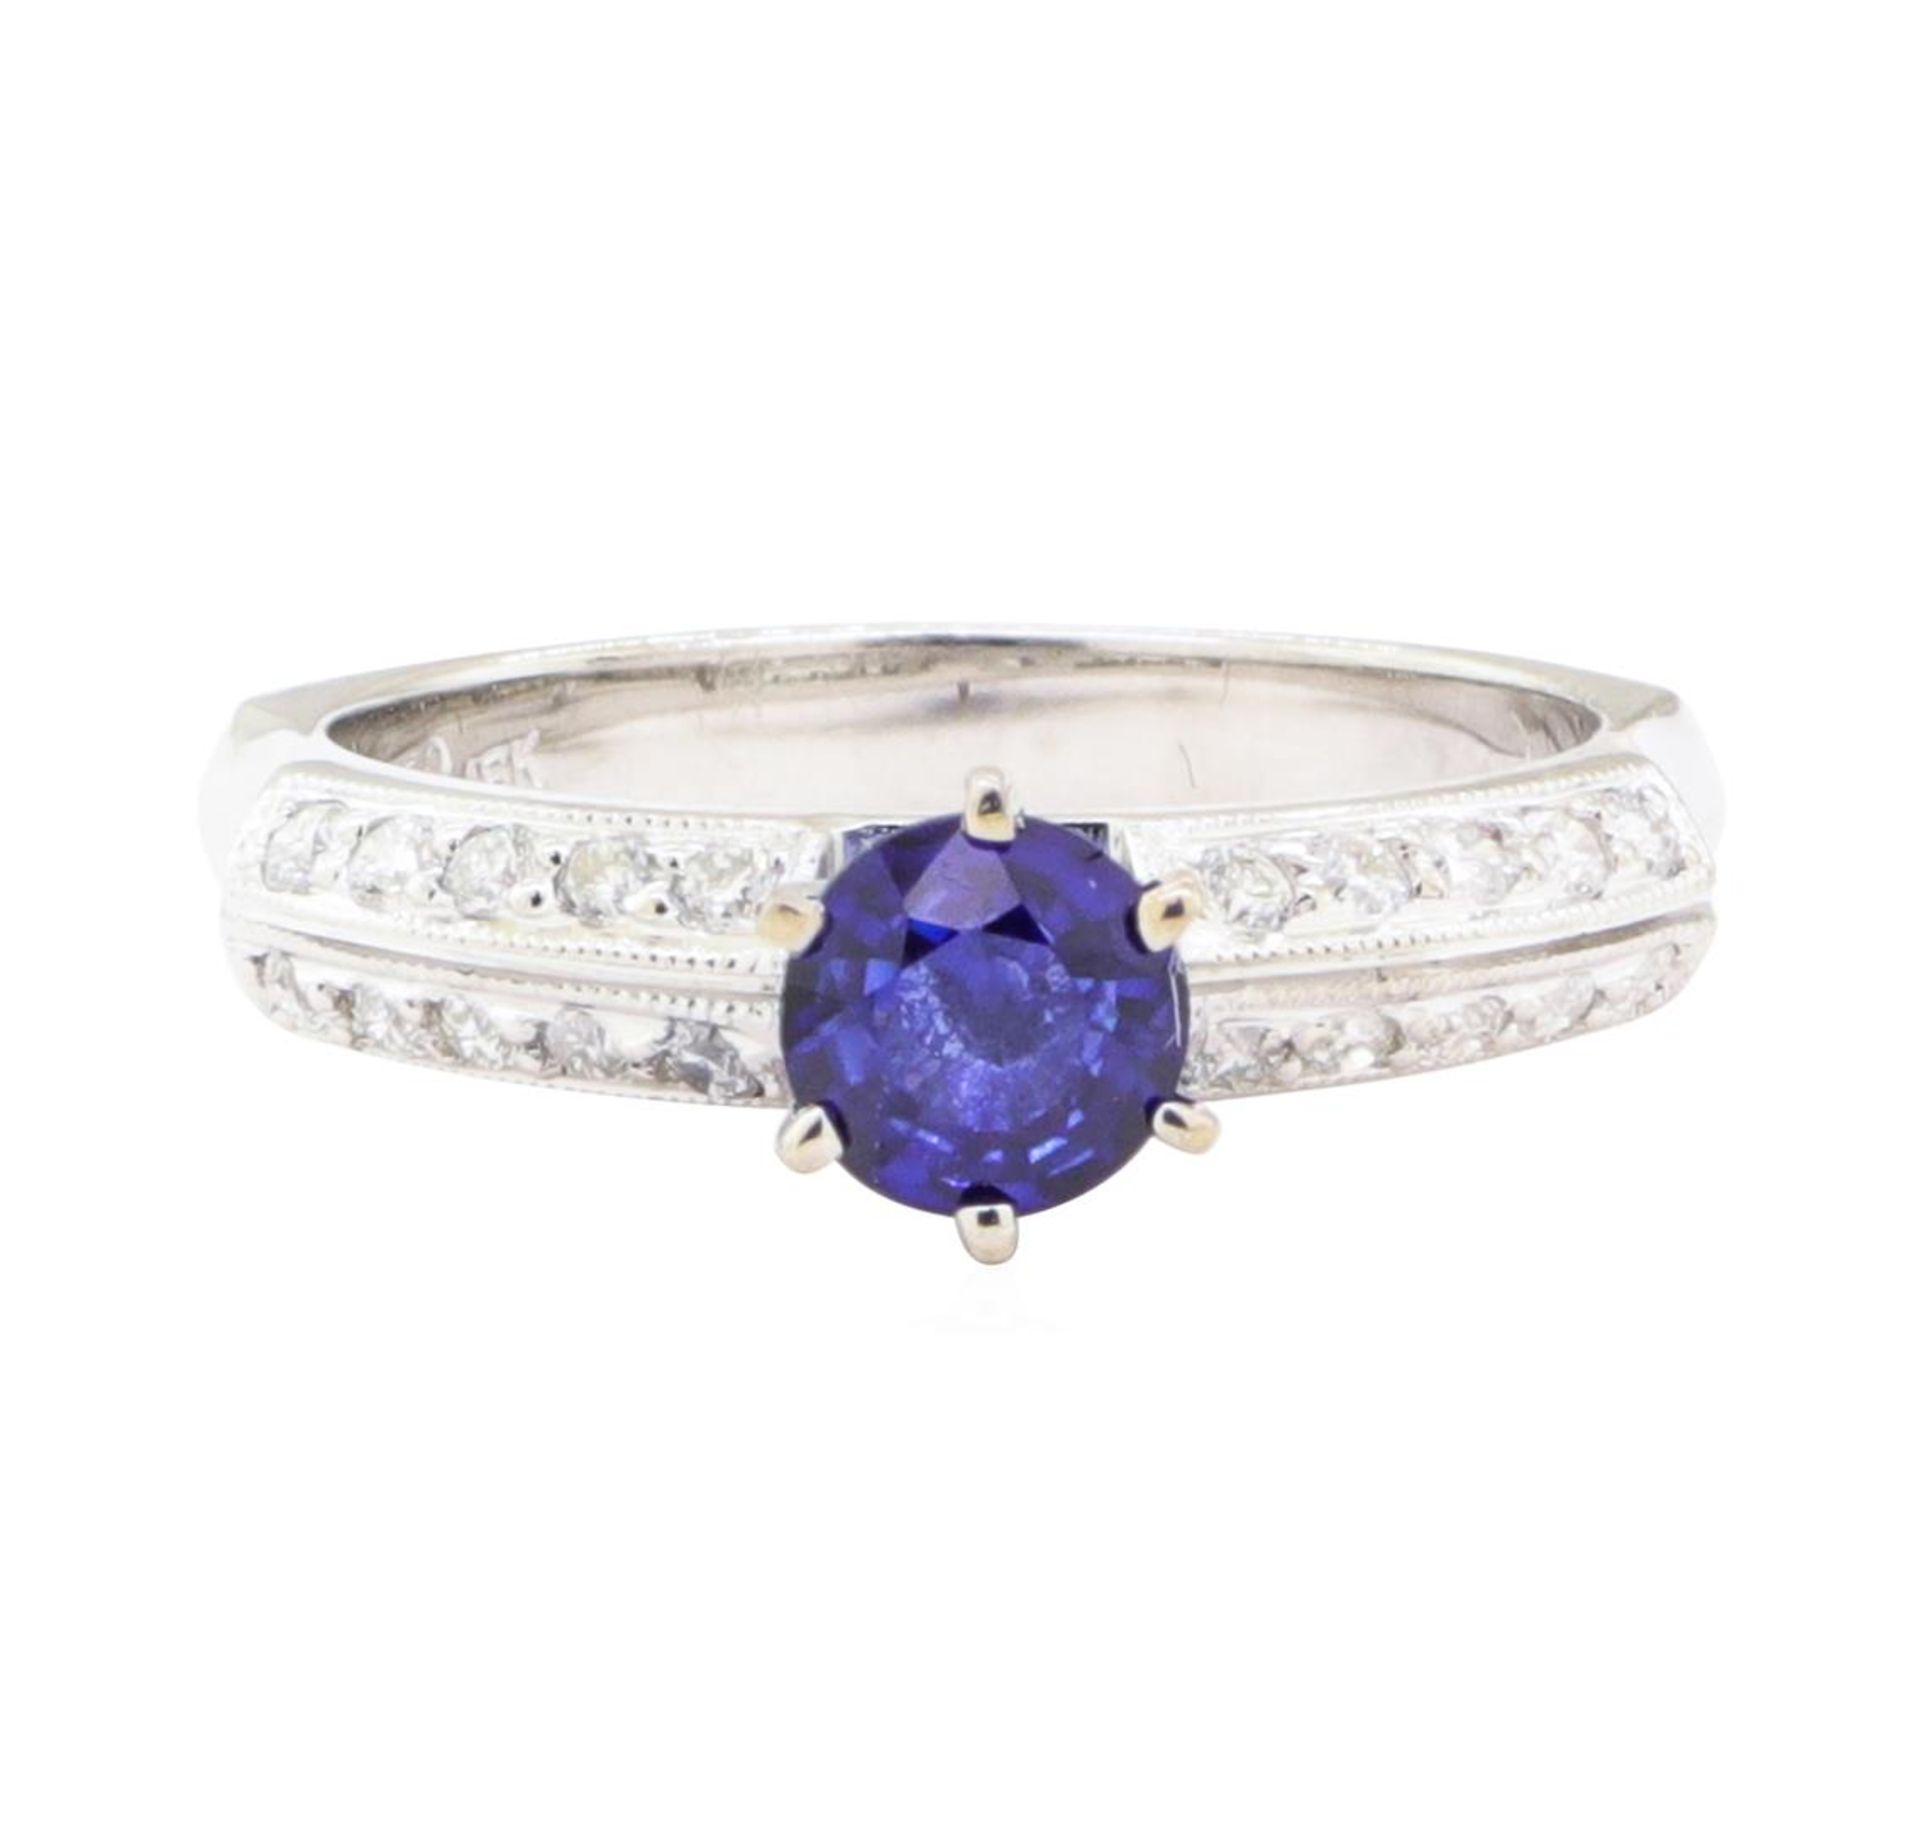 0.95 ctw Sapphire And Diamond Ring - 18KT White Gold - Image 3 of 10